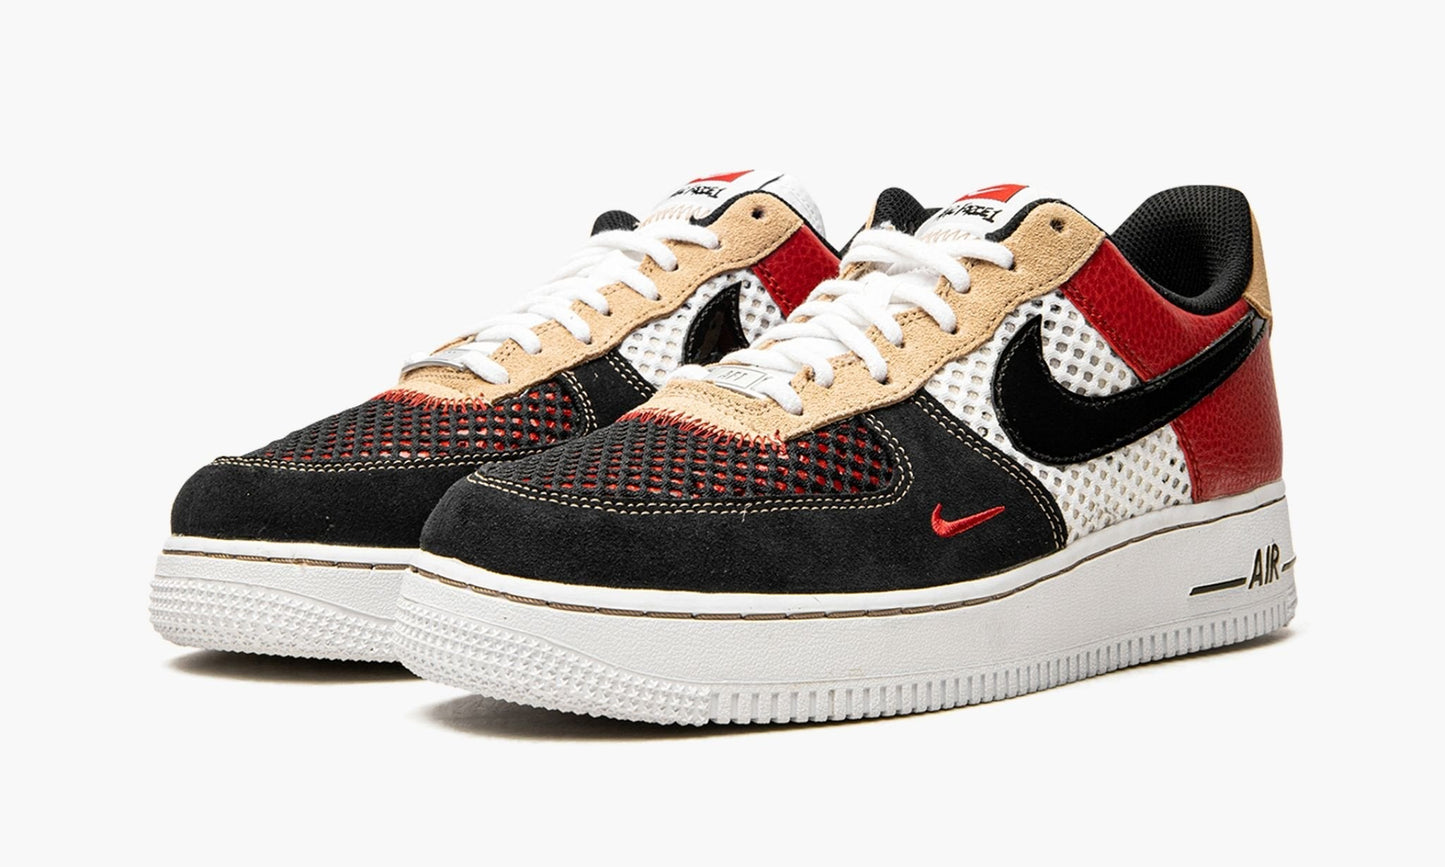 Air Force 1 Low "Alter and Reveal"